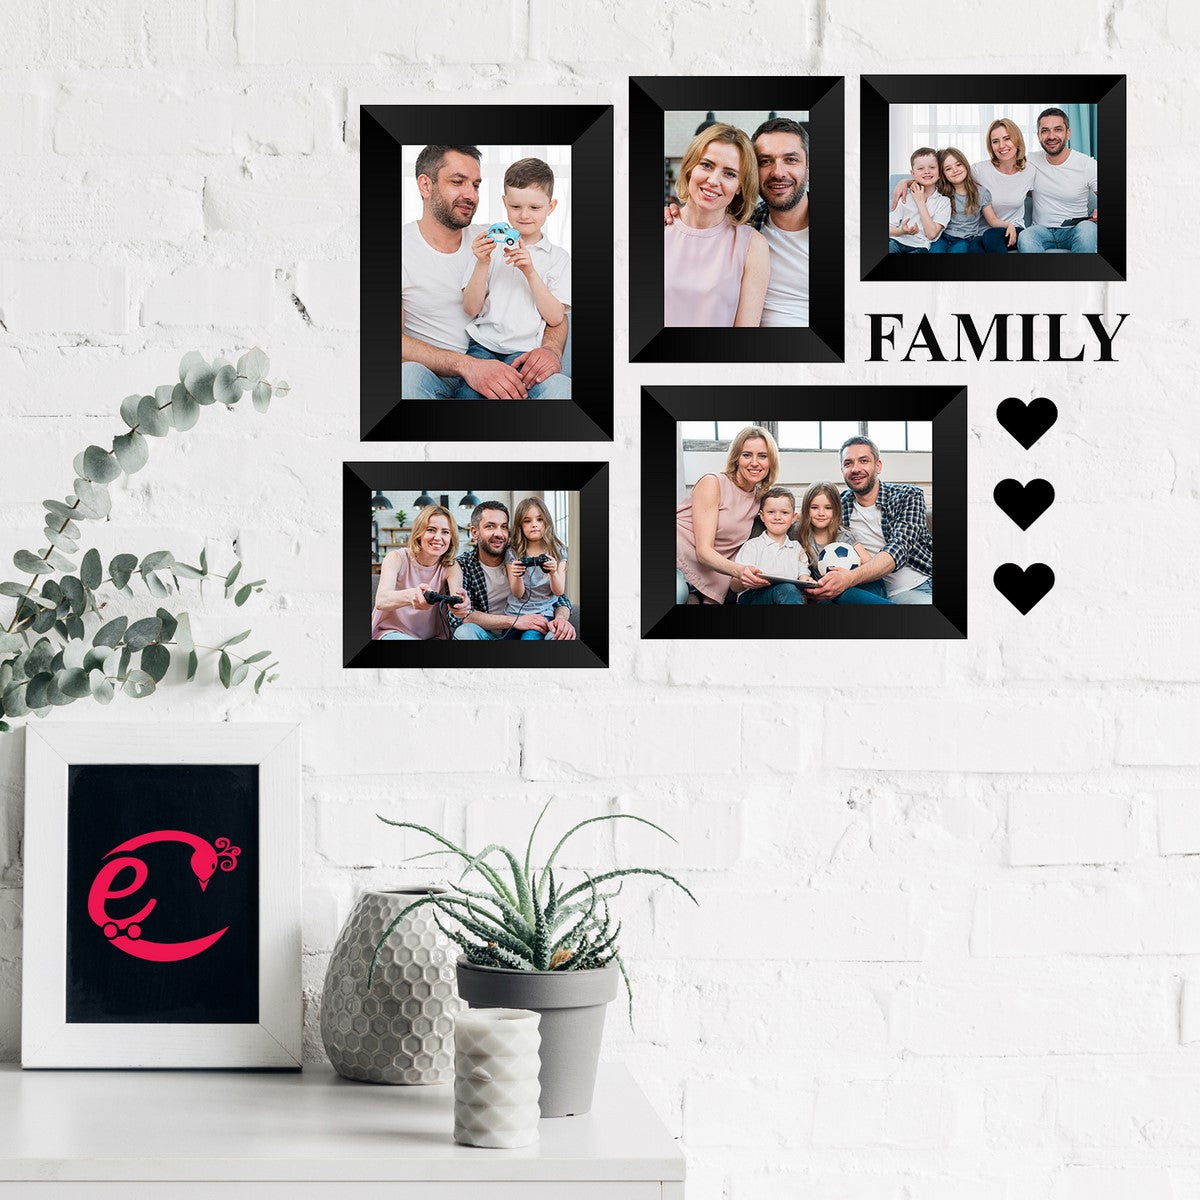 Memory Wall Collage Photo Frame - Set of 5 Photo Frames for 3 Photos of 4"x6", 2 Photos of 5"x7", 1 Piece of FAMILY, 3 Pieces of HEARTS 1